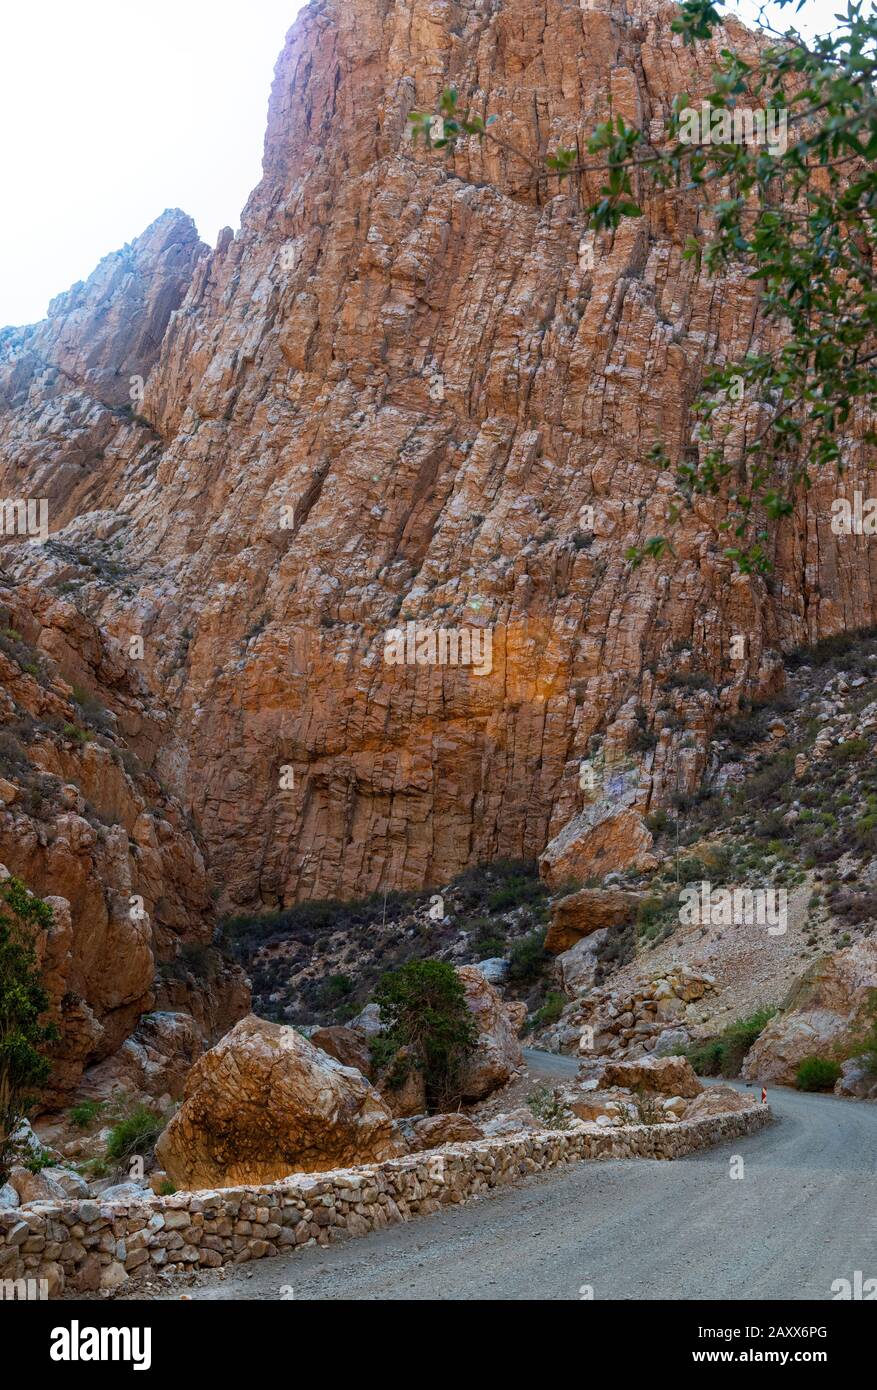 Foothills of the Swartberg Mountain Range, Western Cape Province, South Africa Stock Photo